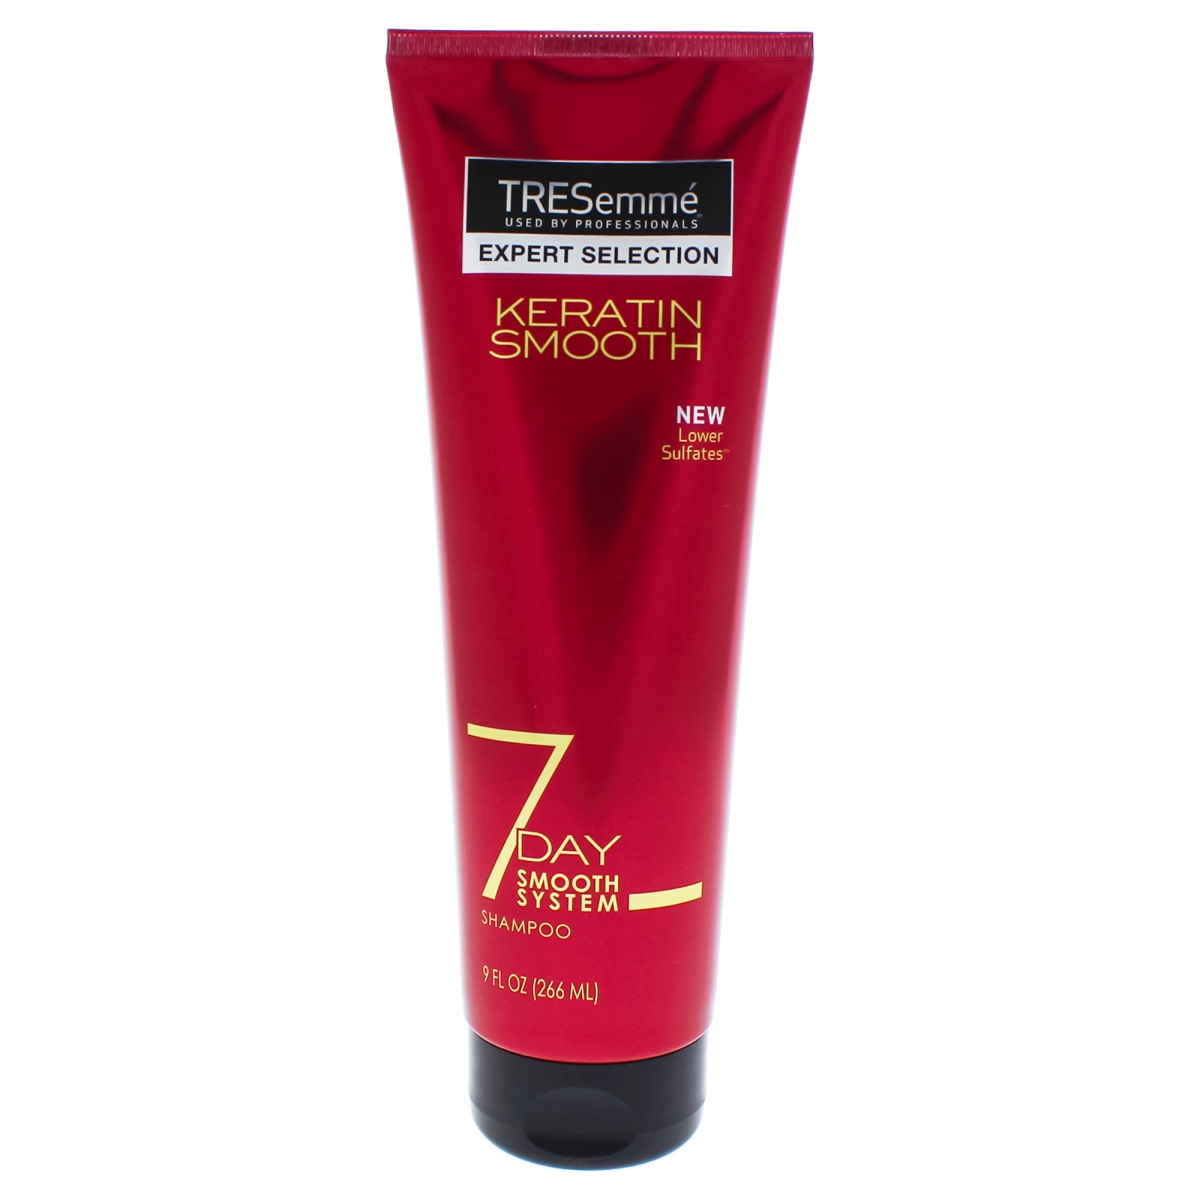 I0090412 Expert Selection 7 Day Smooth System Shampoo For Unisex - 4.3 Oz